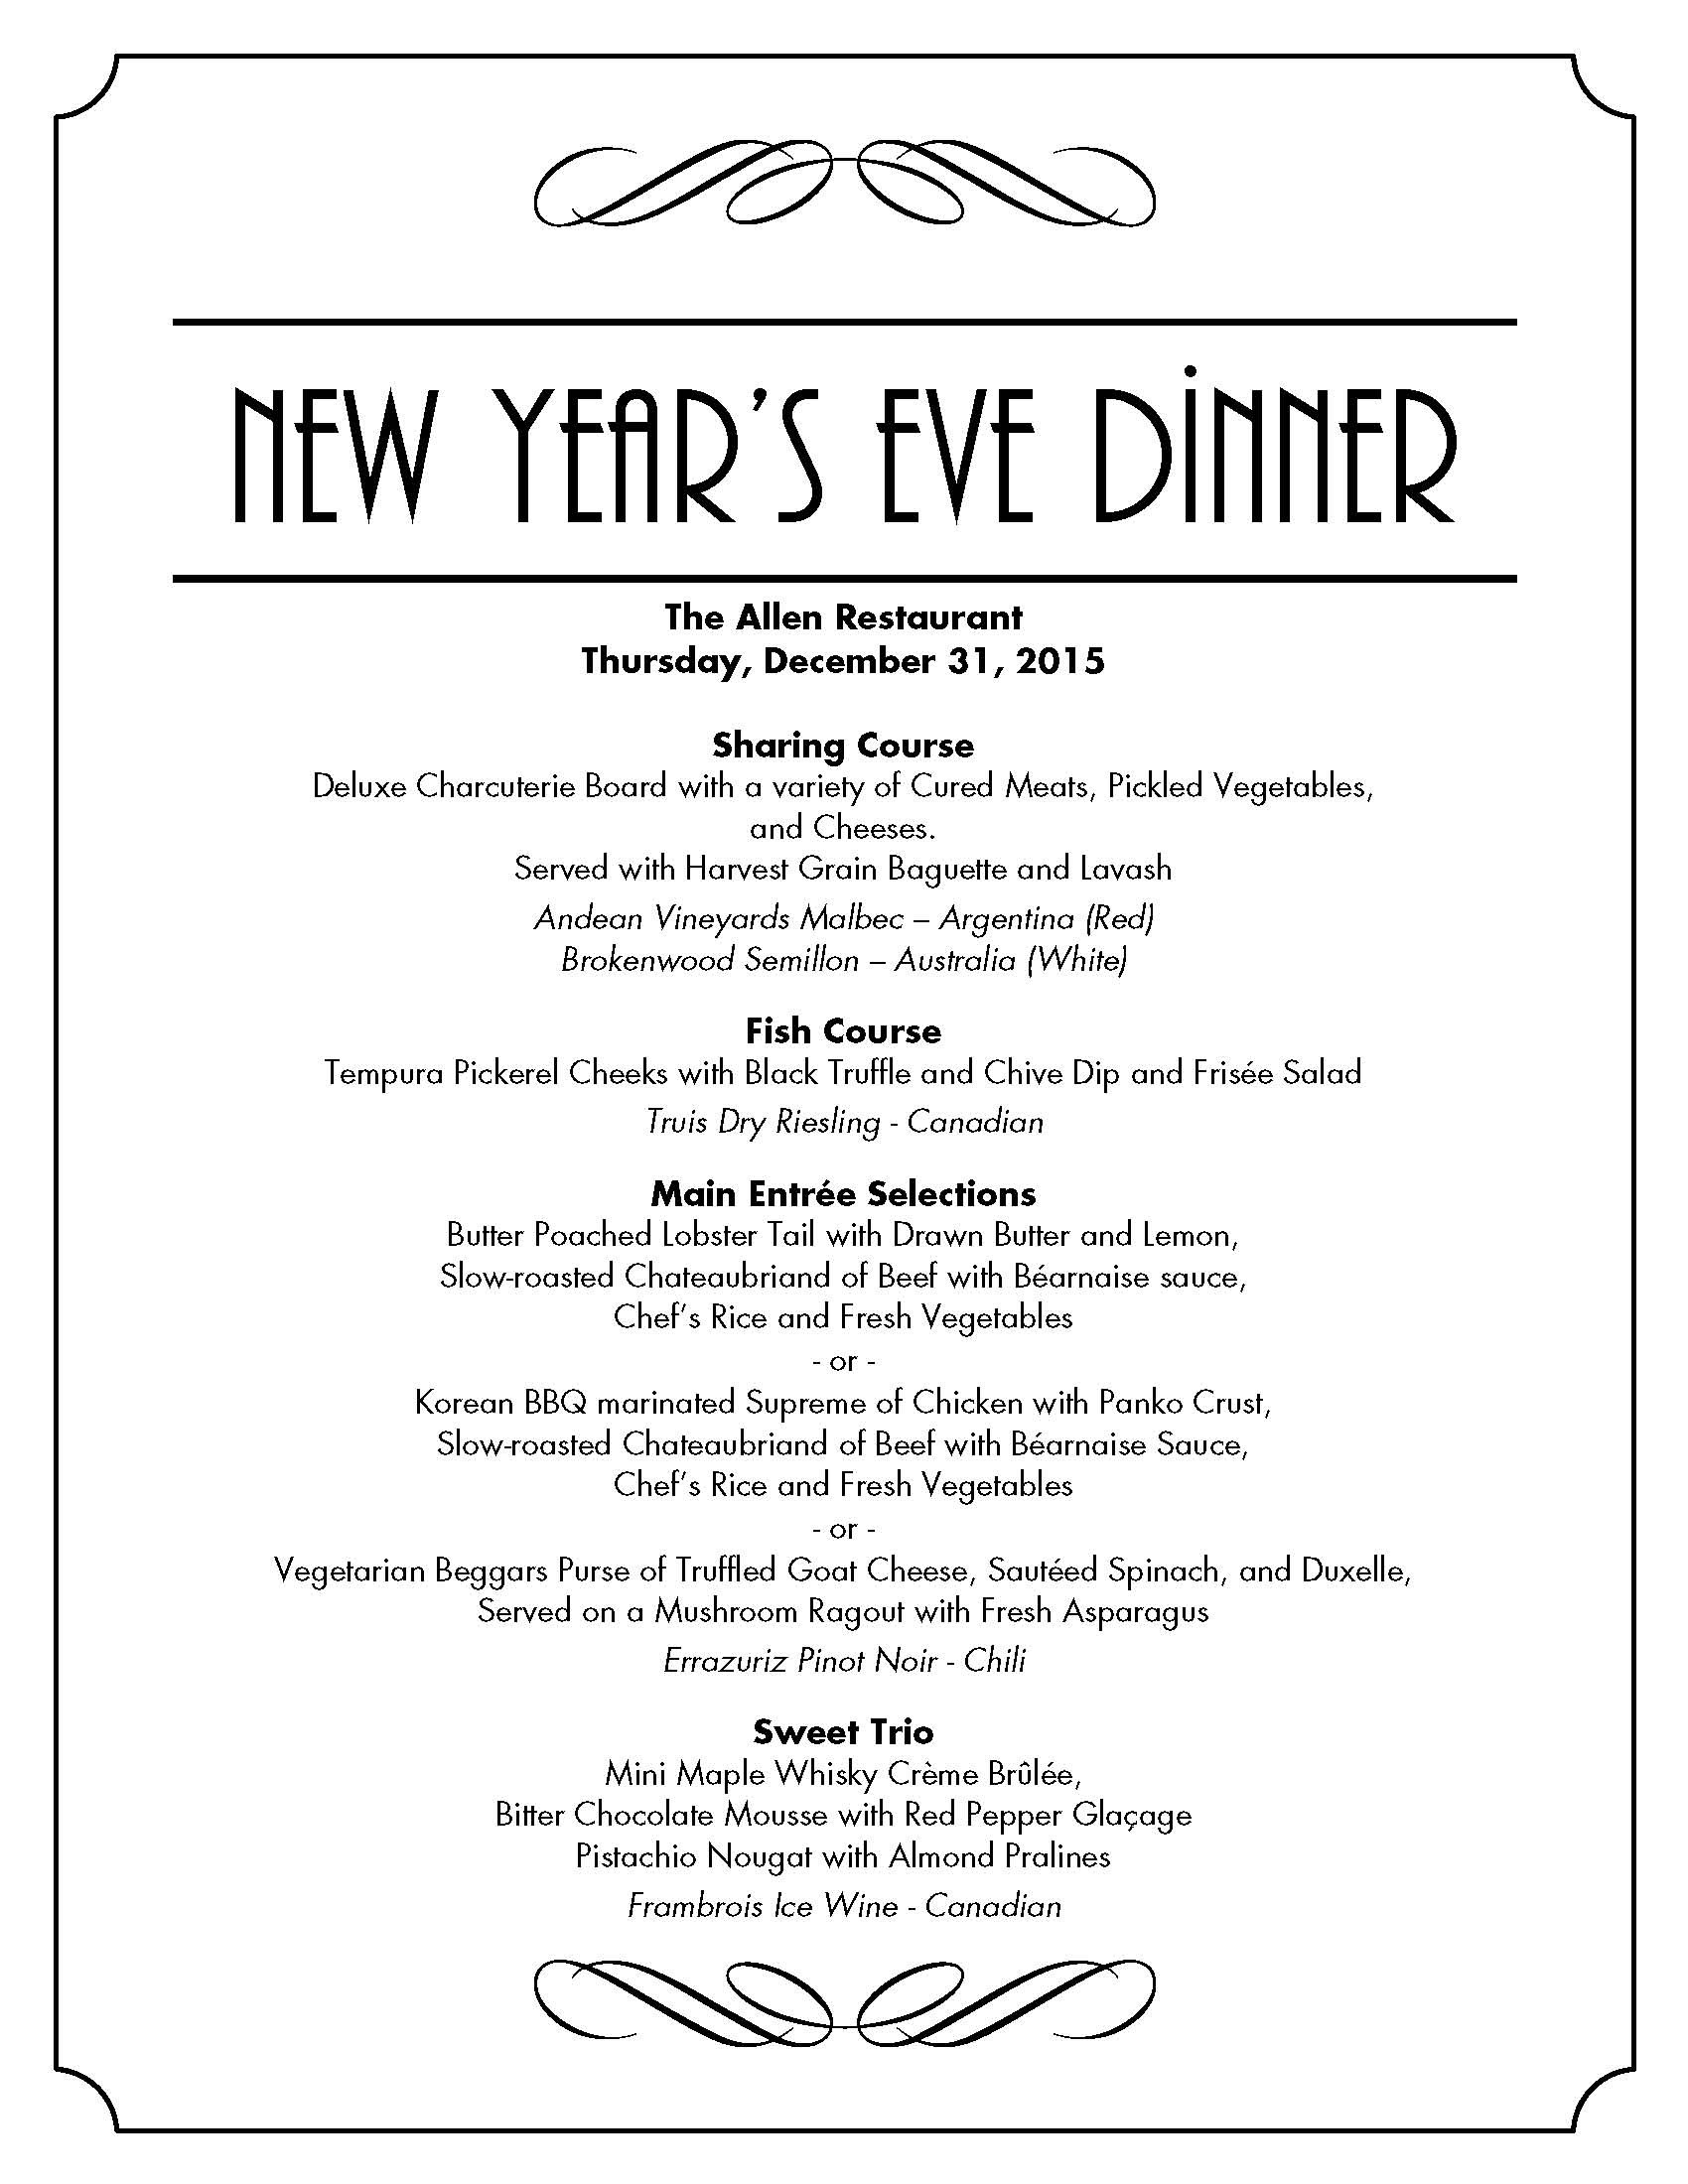 New Years Dinner Menu
 New Years Eve Dinner at The Allen Restaurant